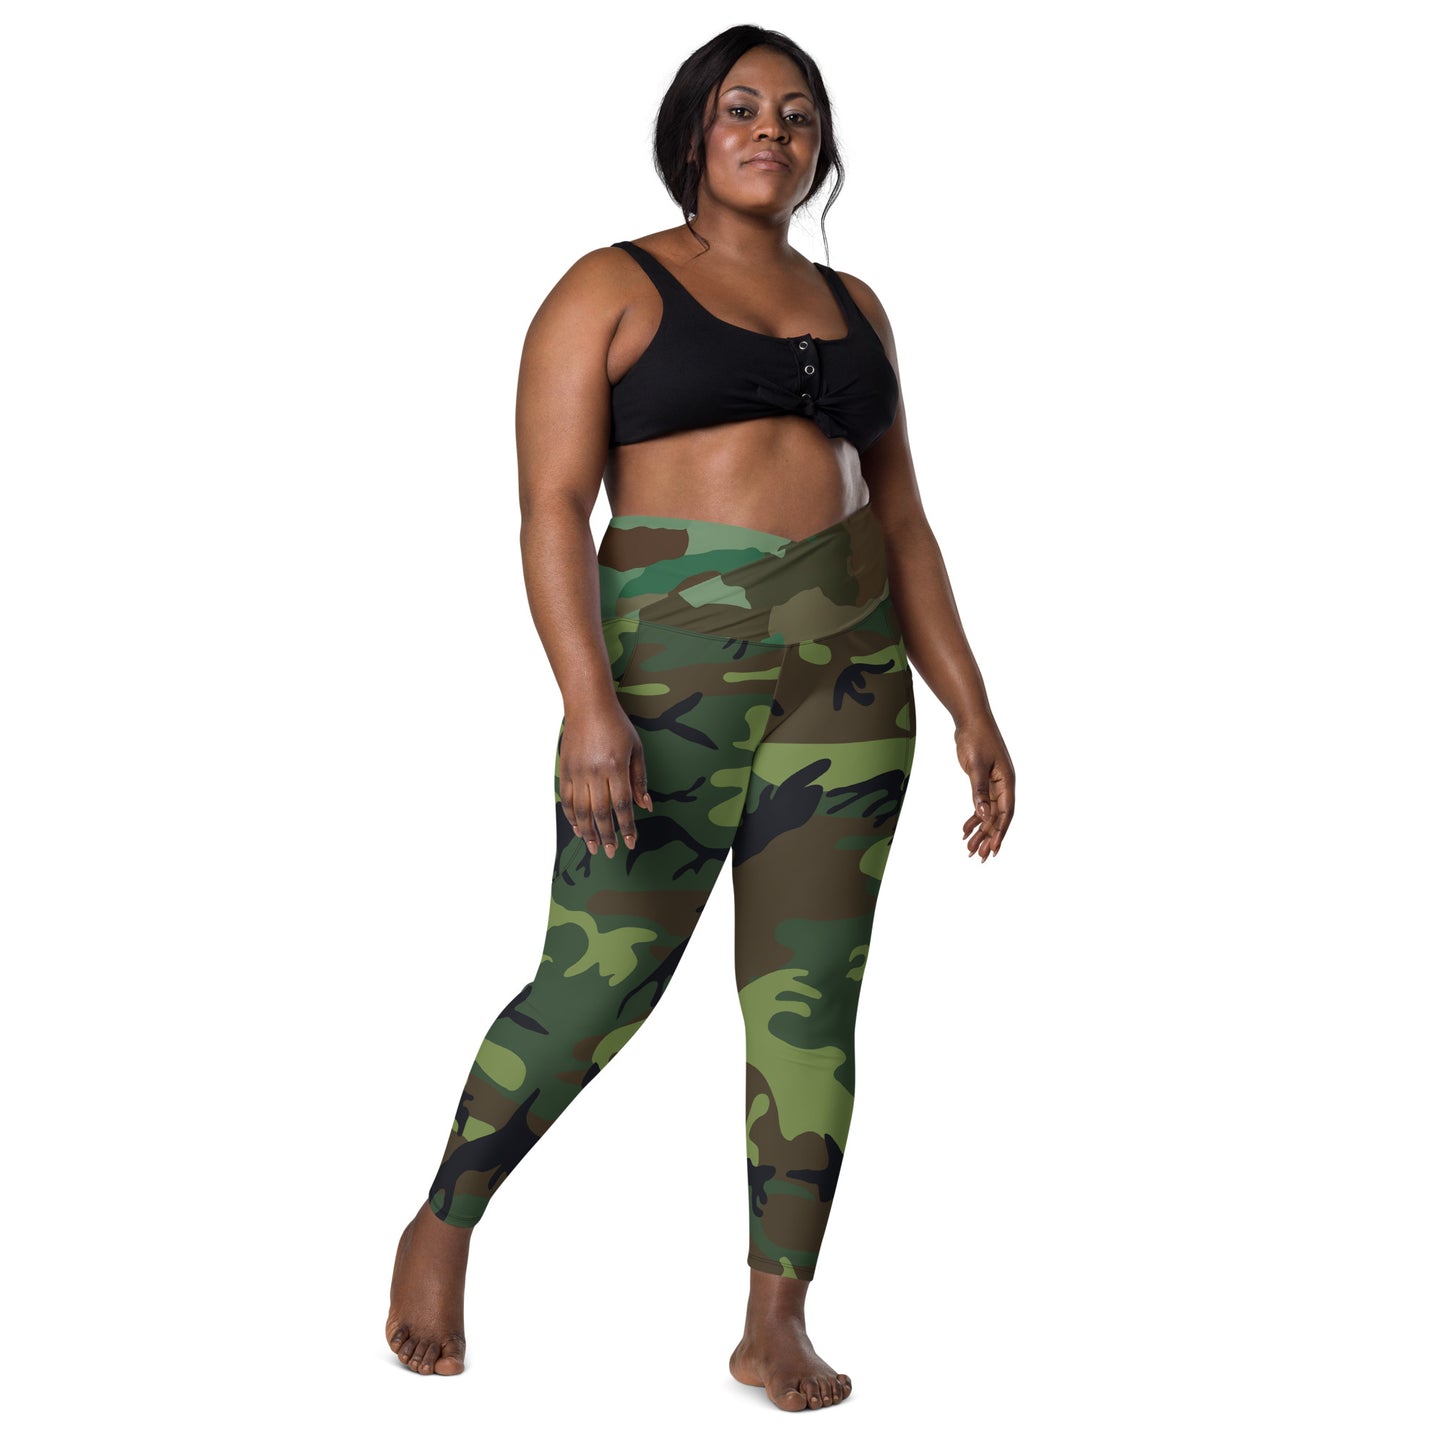 Crossover leggings with pockets - Brown Green & Black Camouflage